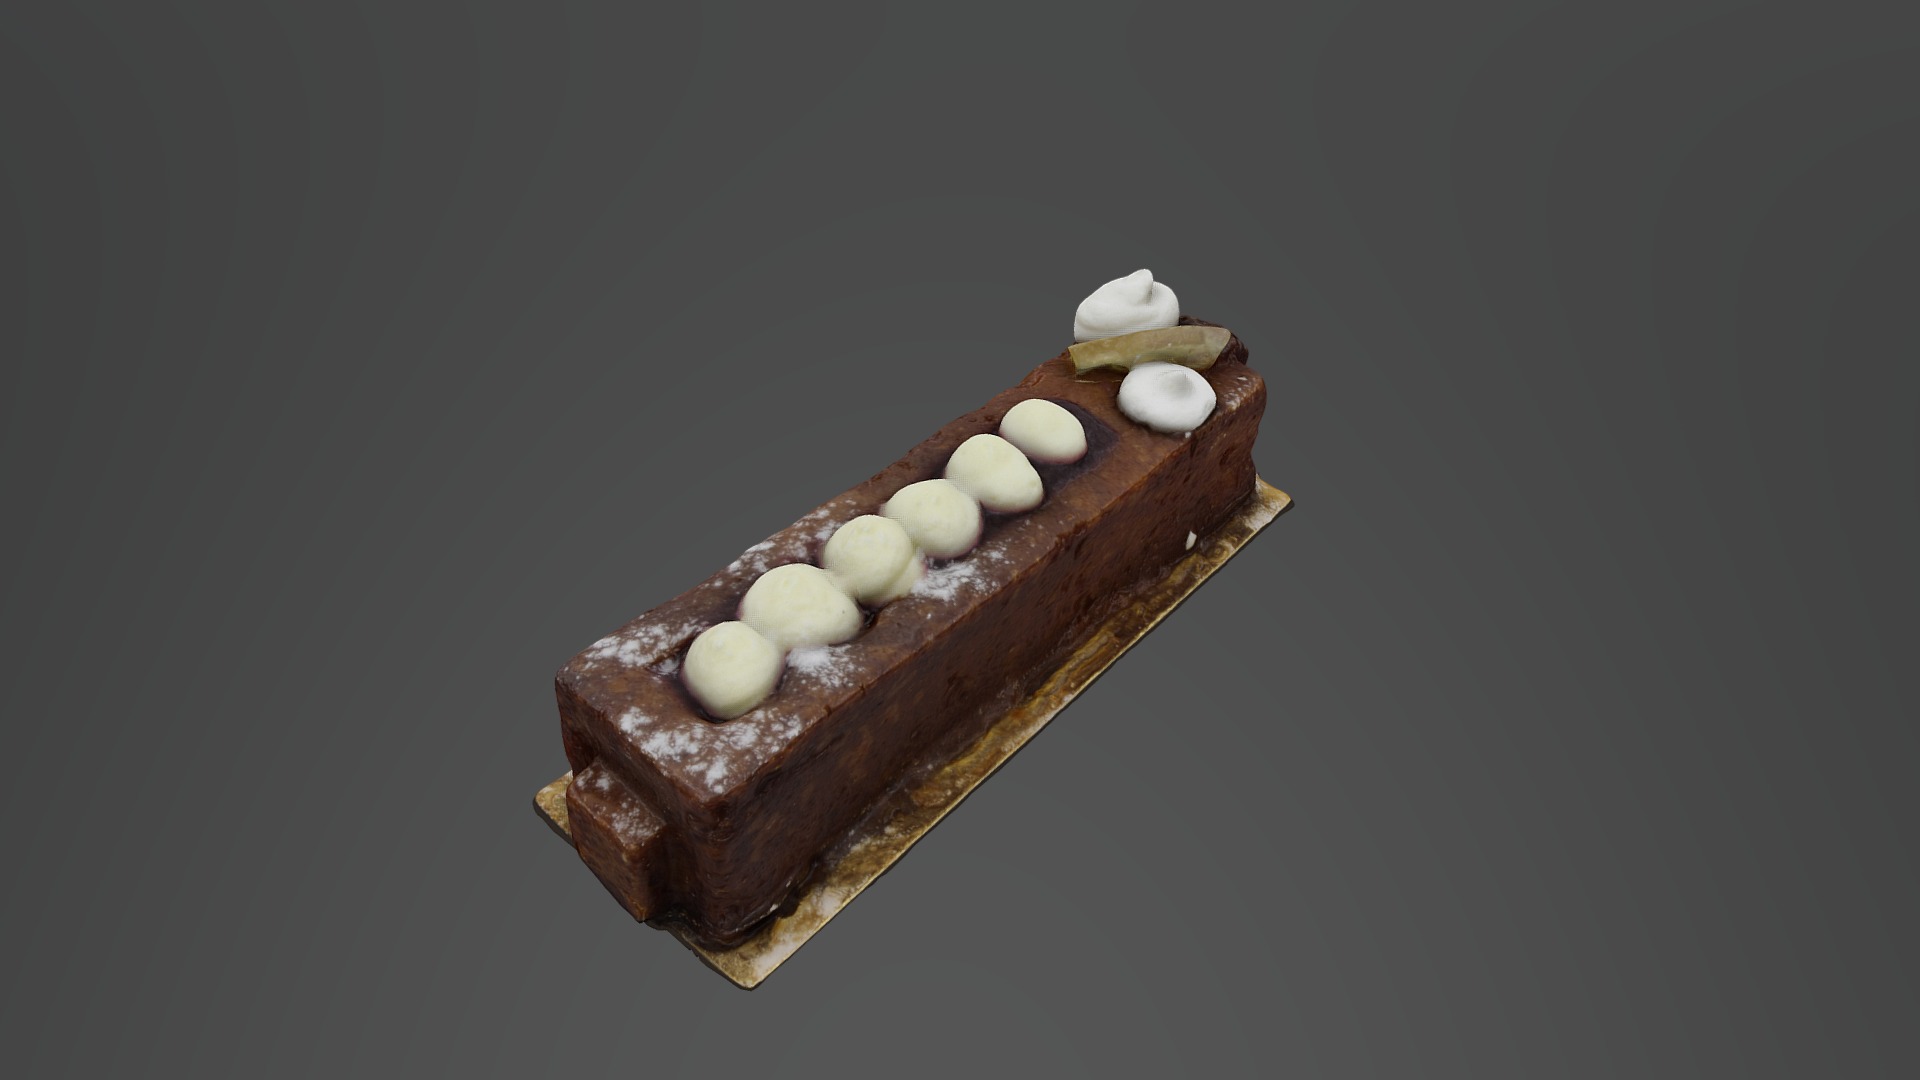 3D model 15PIG - This is a 3D model of the 15PIG. The 3D model is about a piece of bread with white balls on it.